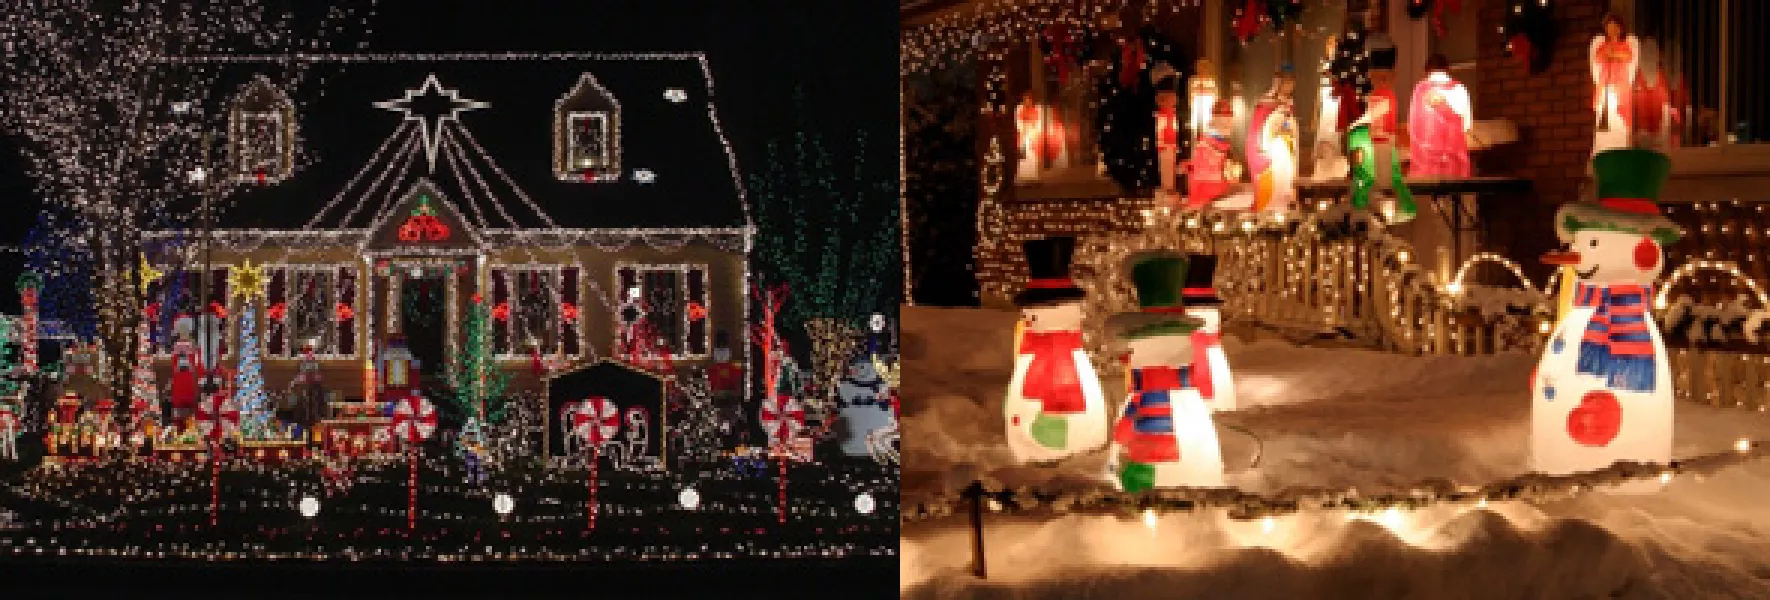 Outdoor Christmas Lights: Love them or hate them?